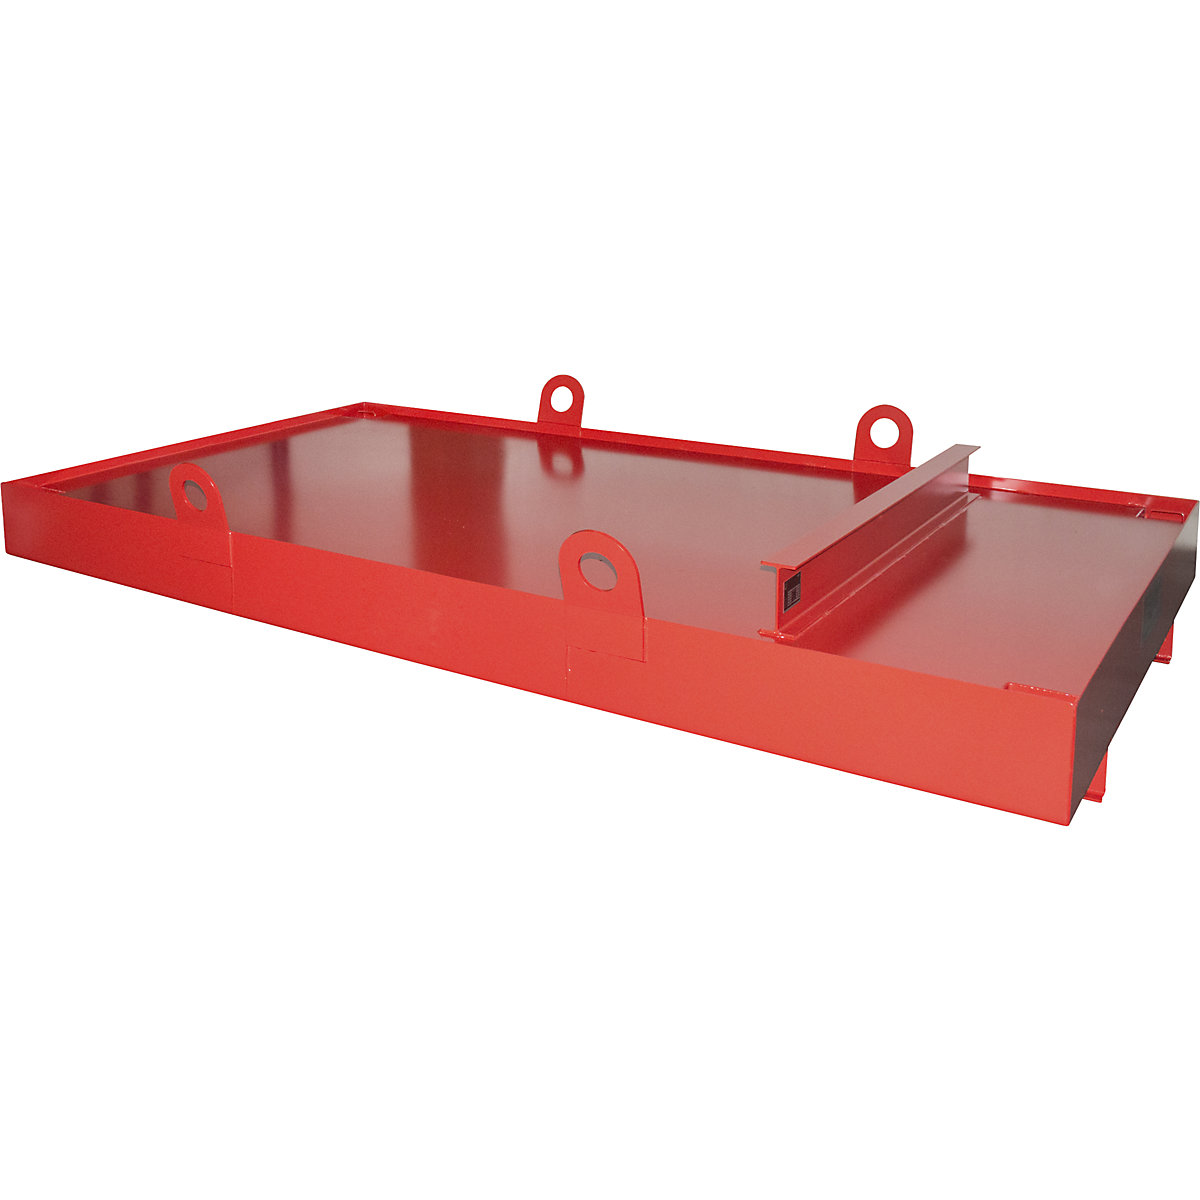 Sump tray for skip trailer – eurokraft pro, for skip trailers, sump capacity 1276 l, red-2